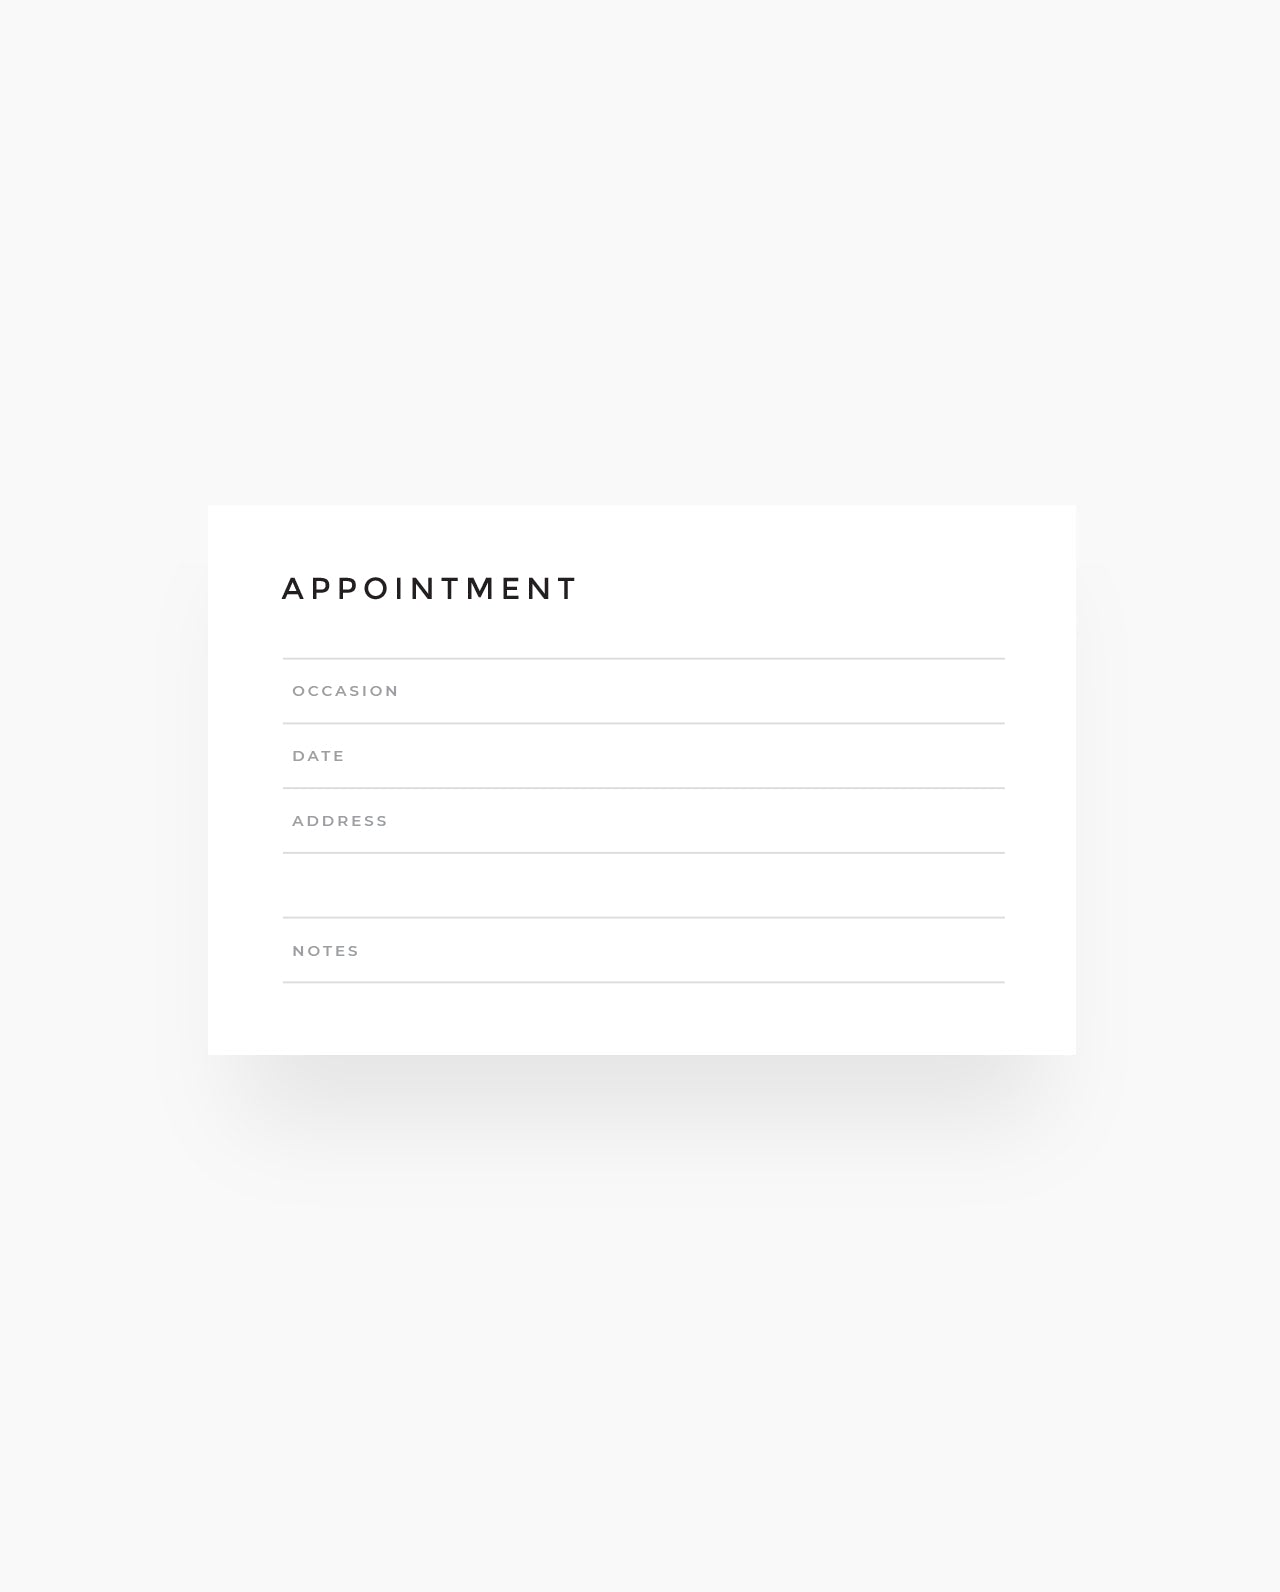 WC001 - Appointment - Wallet Cards